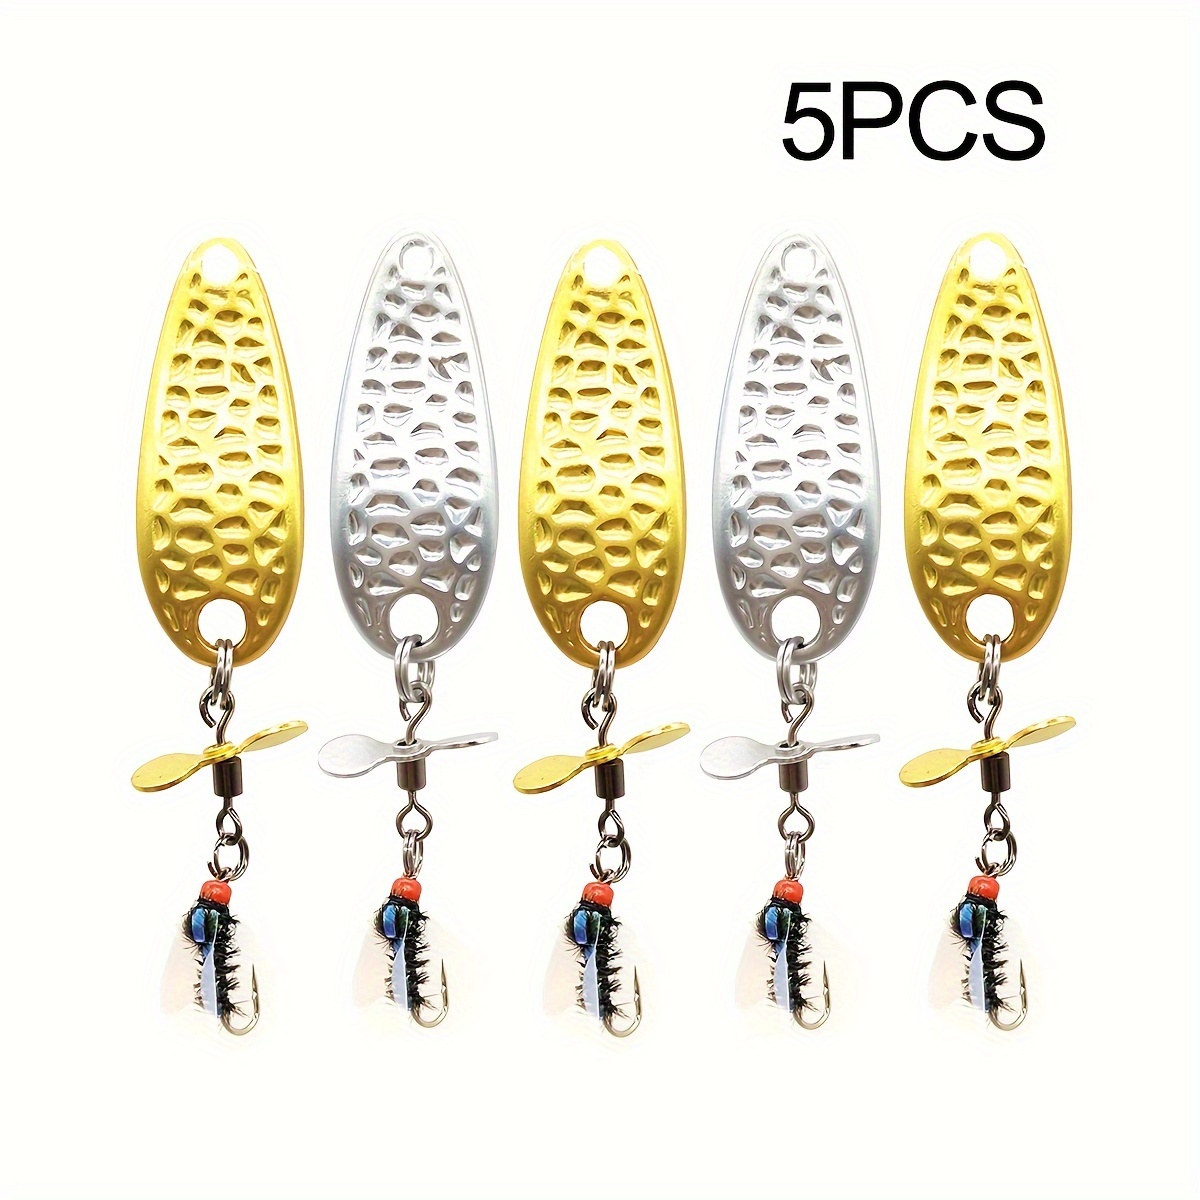 5pcs 0.18oz Simulated Metal Spoon Fishing Lures With Propeller For Salmon  Bass Trout, Fly Fishing Bait, Fishing Accessories For Freshwater